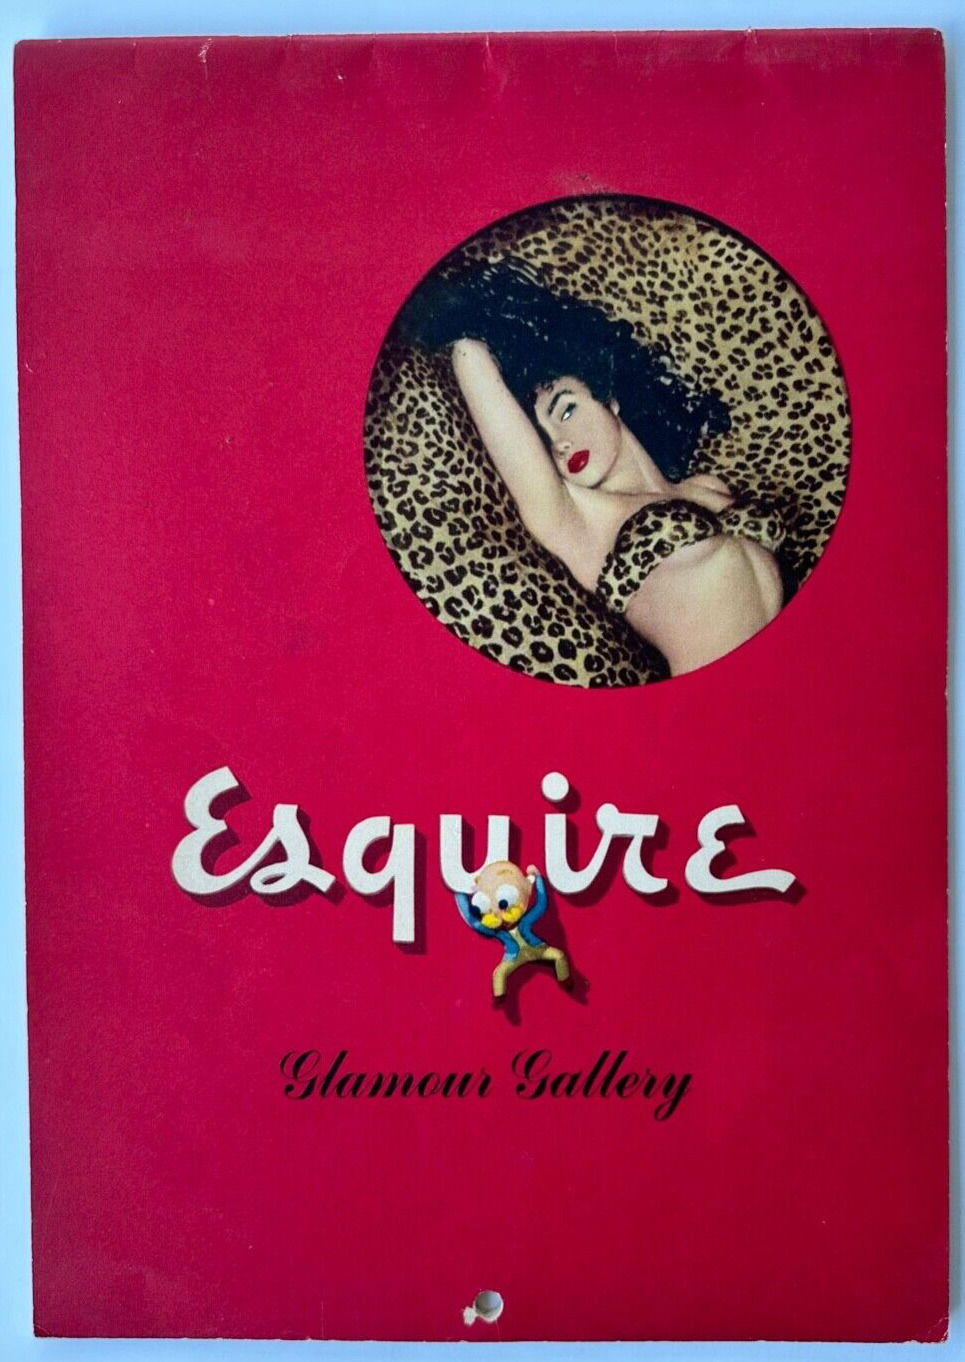 Vintage Original 1948 Esquire Glamour Gallery Pin Up Girls Calendar, Complete